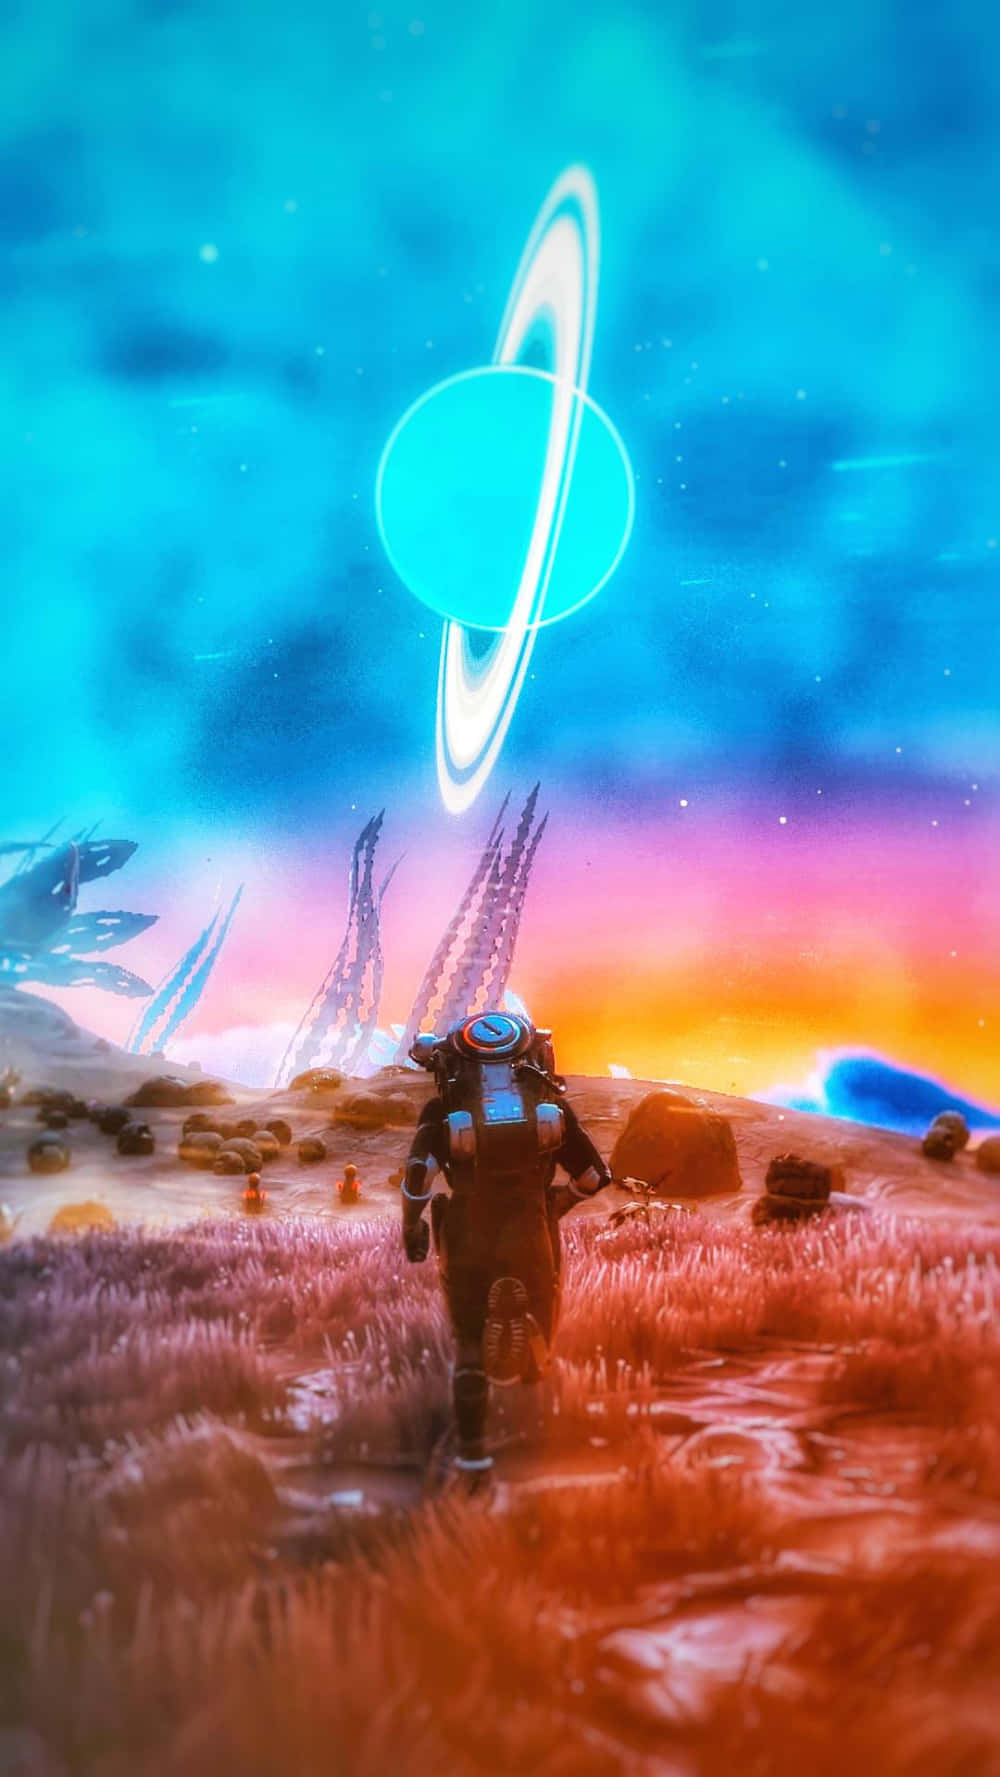 "Explore the infinite possibilities of the universe with No Man’s Sky, now enhanced for mobile phone devices". Wallpaper